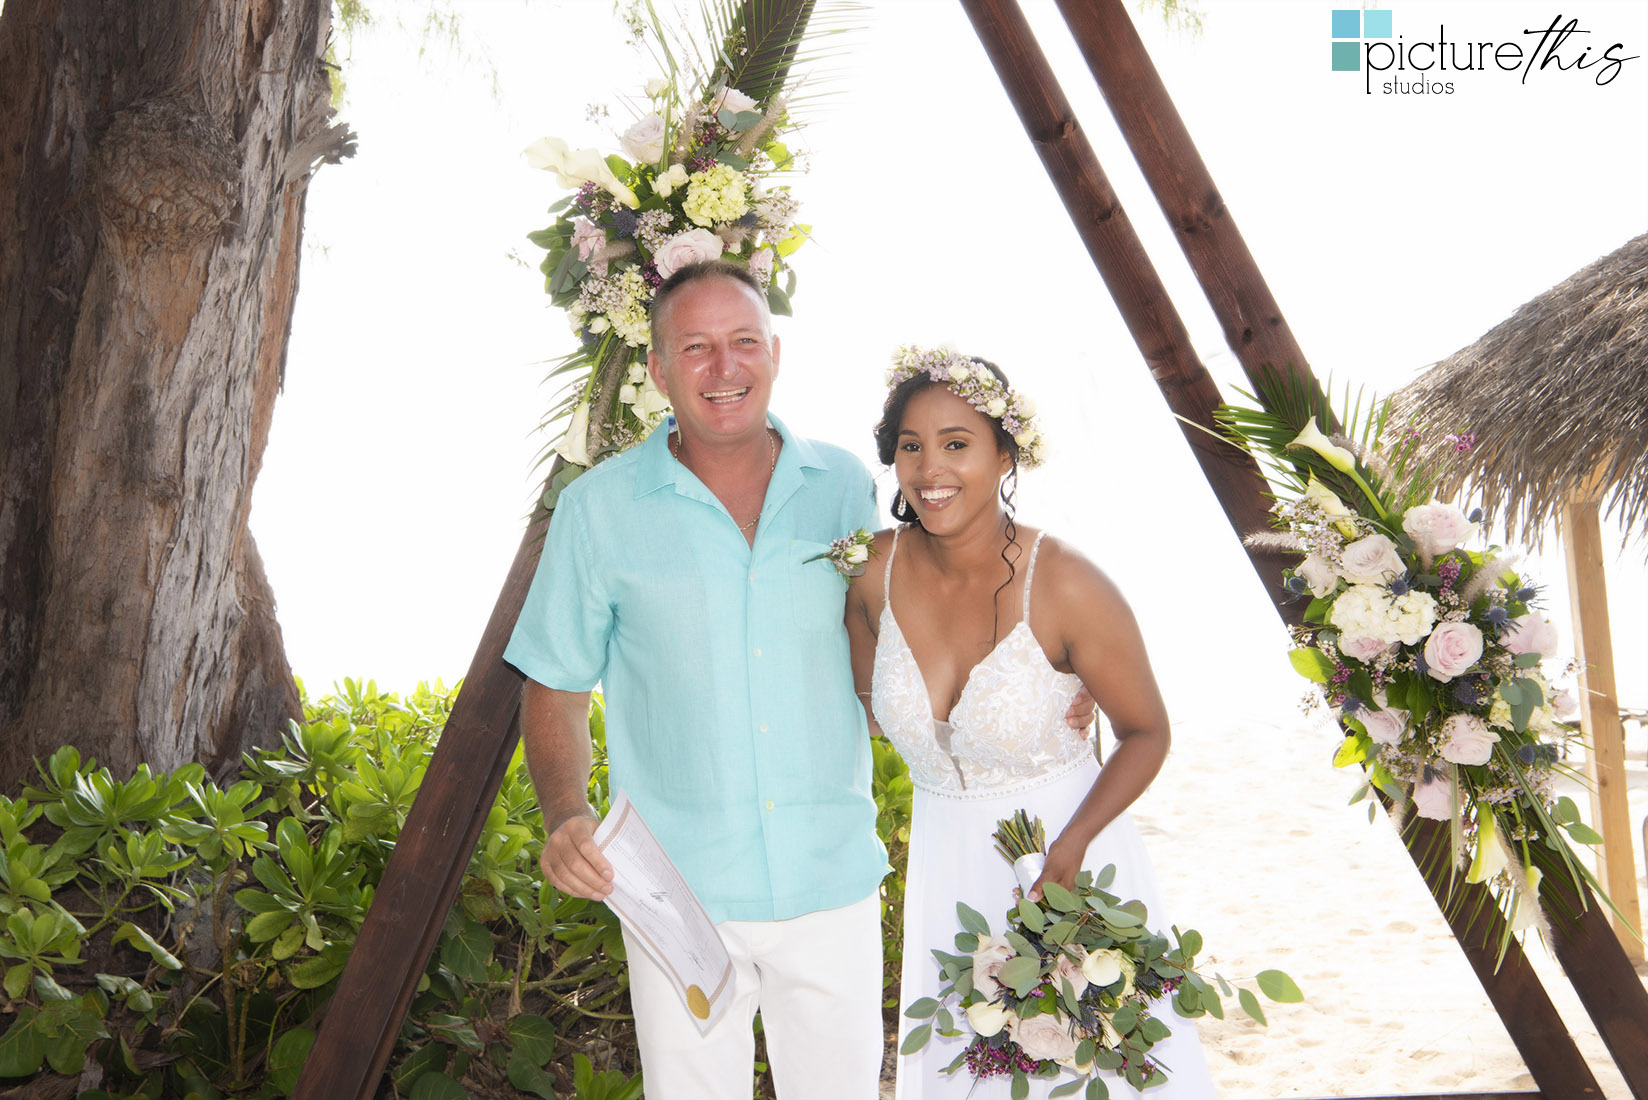 Picture This Studios and Heather Holt Photography captured this beautiful Cayman Islands Wedding held at the Meridian.